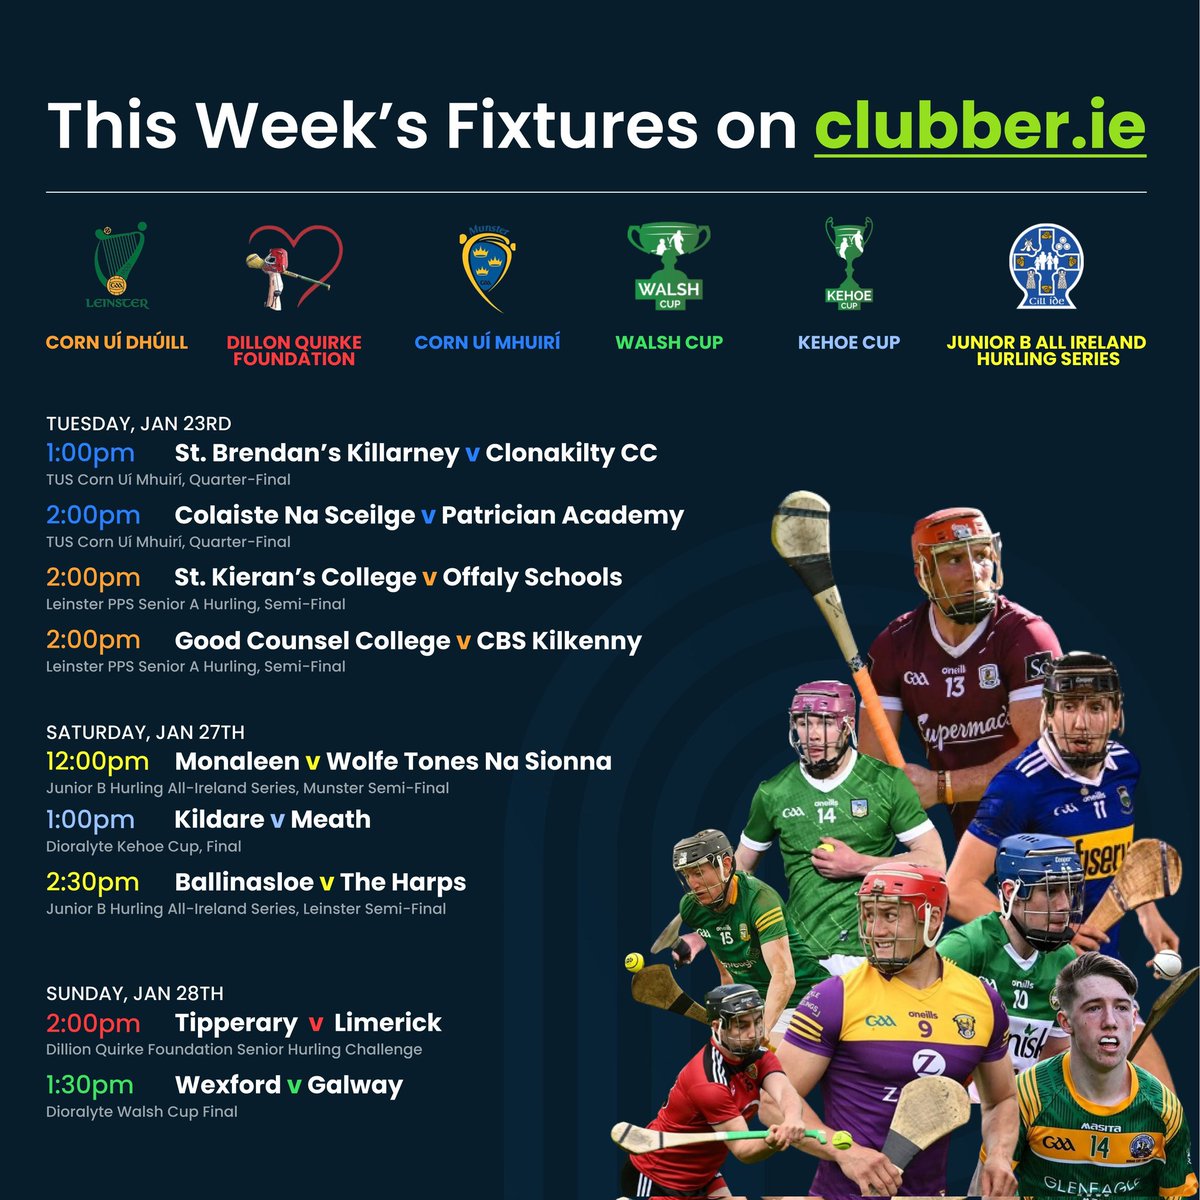 Best of Luck to all our players with the Colaiste na Sceilge Corn Uí Mhuirí Quarter final today against Patrician Academy Mallow. Game will be on Clubber TV